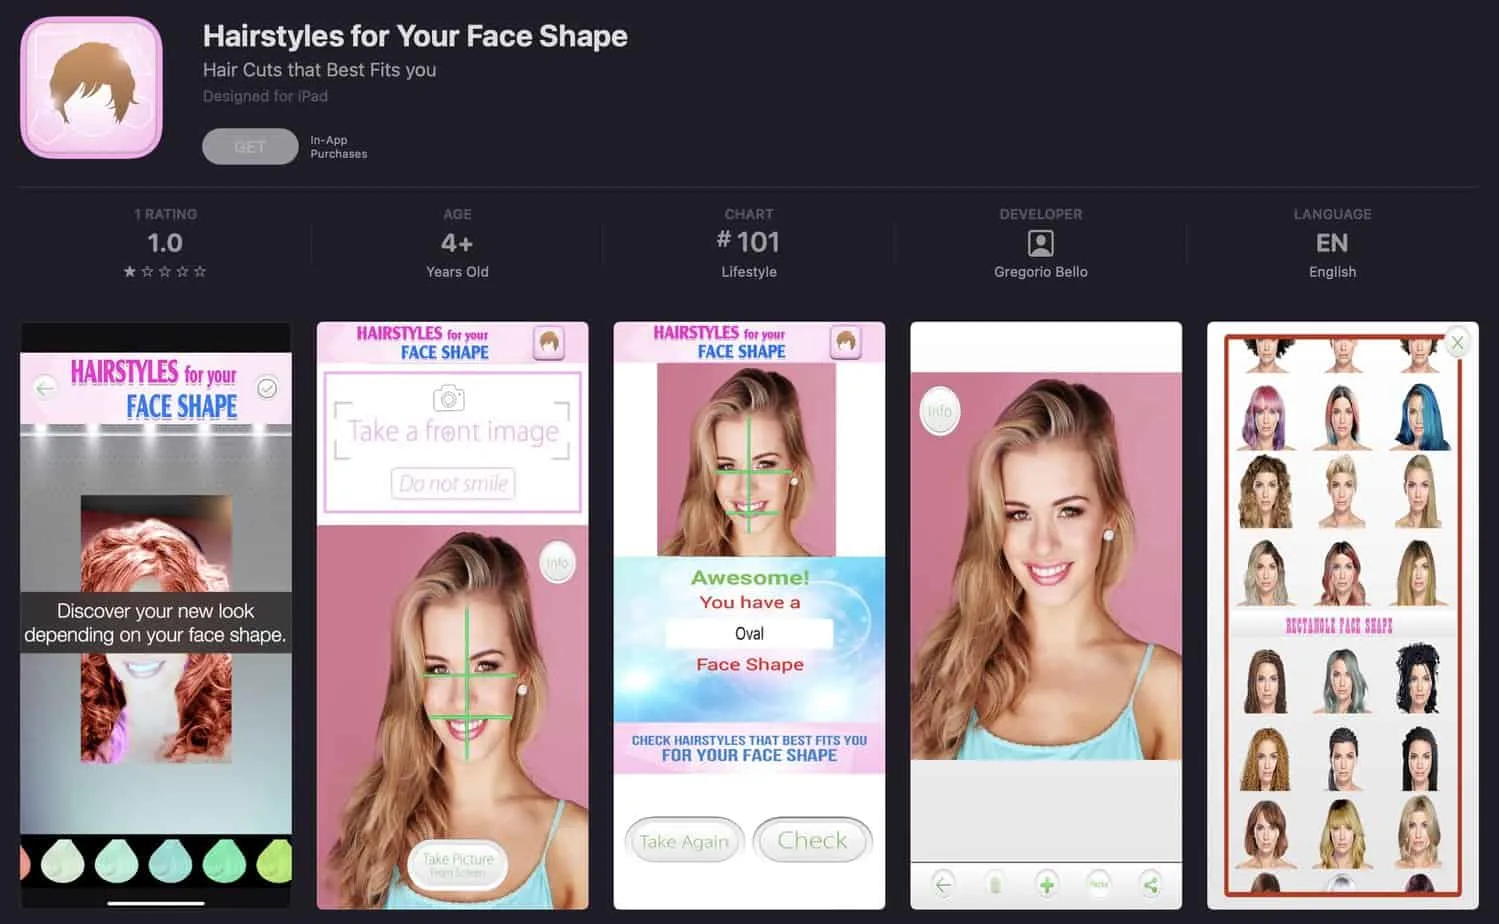 Using the Hairstyles for Your Face Shape app you can use their magic mirror to find the best hairstyle for face.